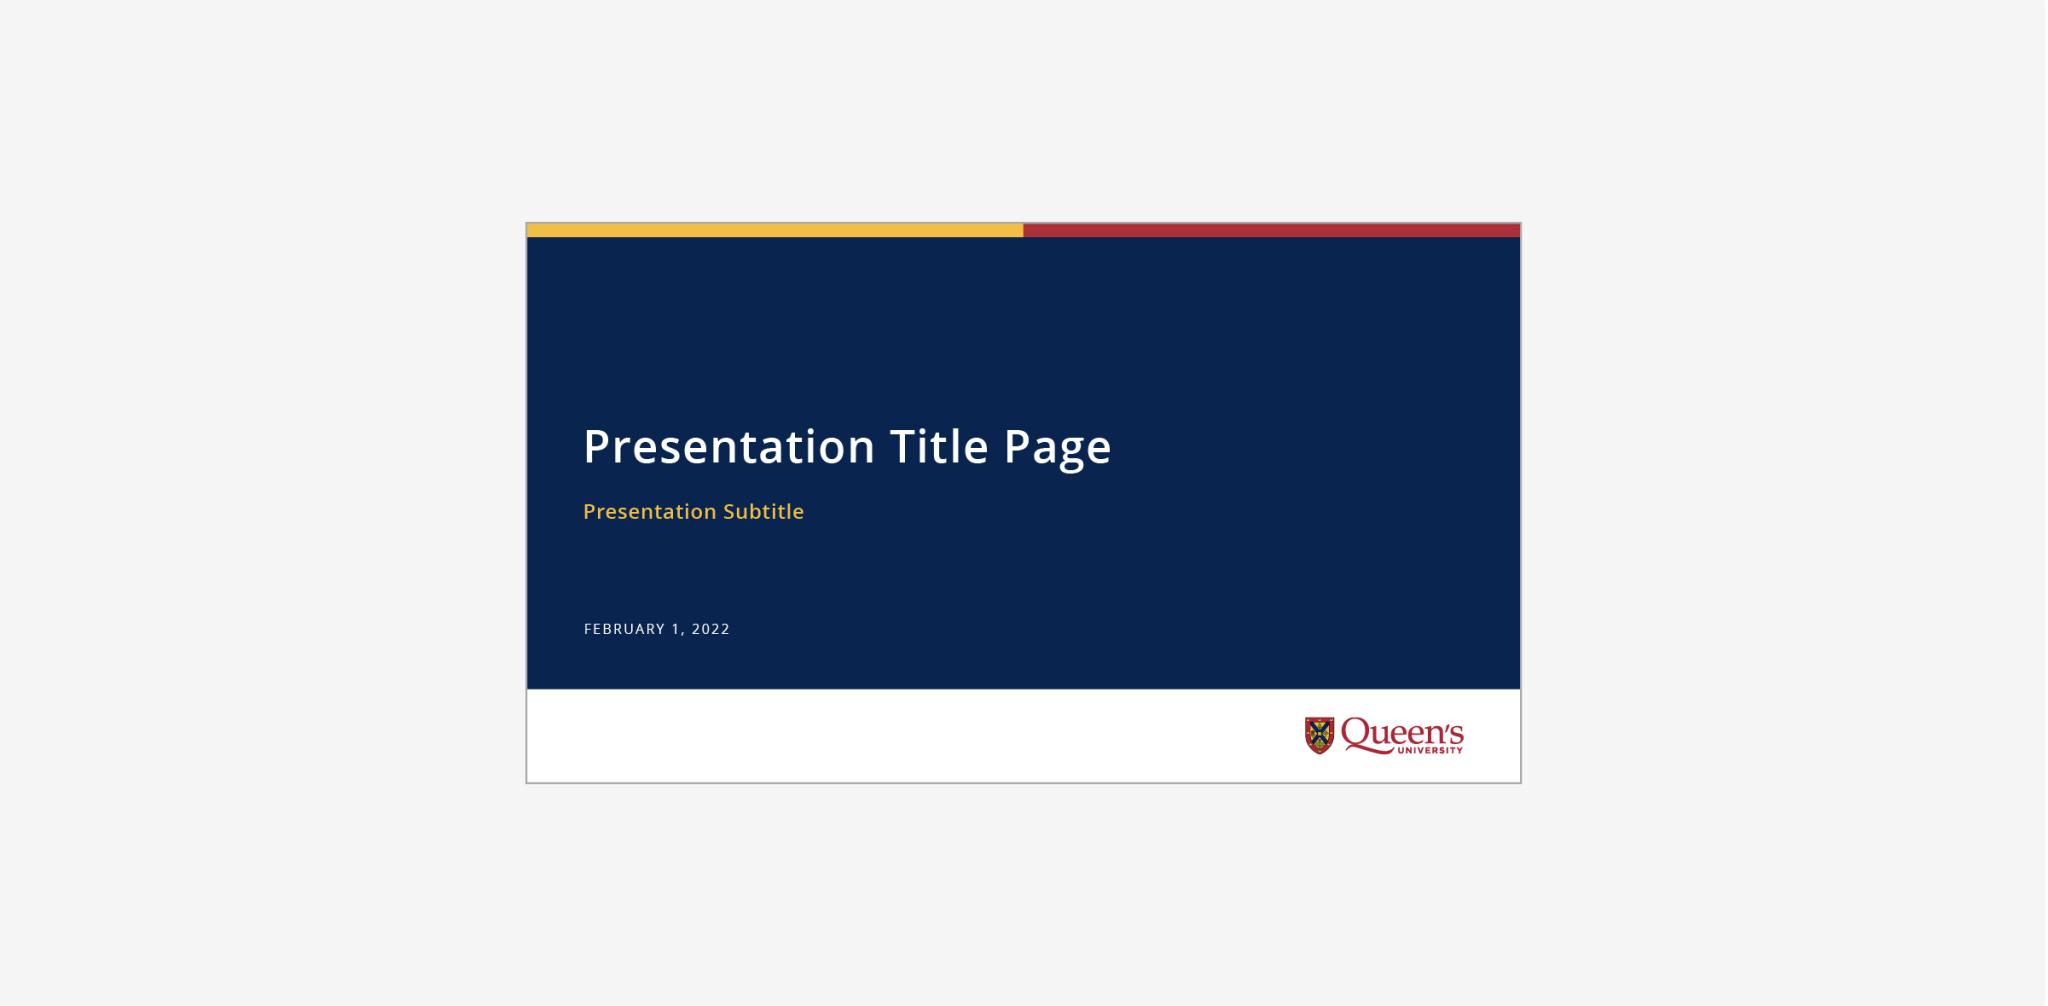 Horizontal logo in application on a powerpoint template